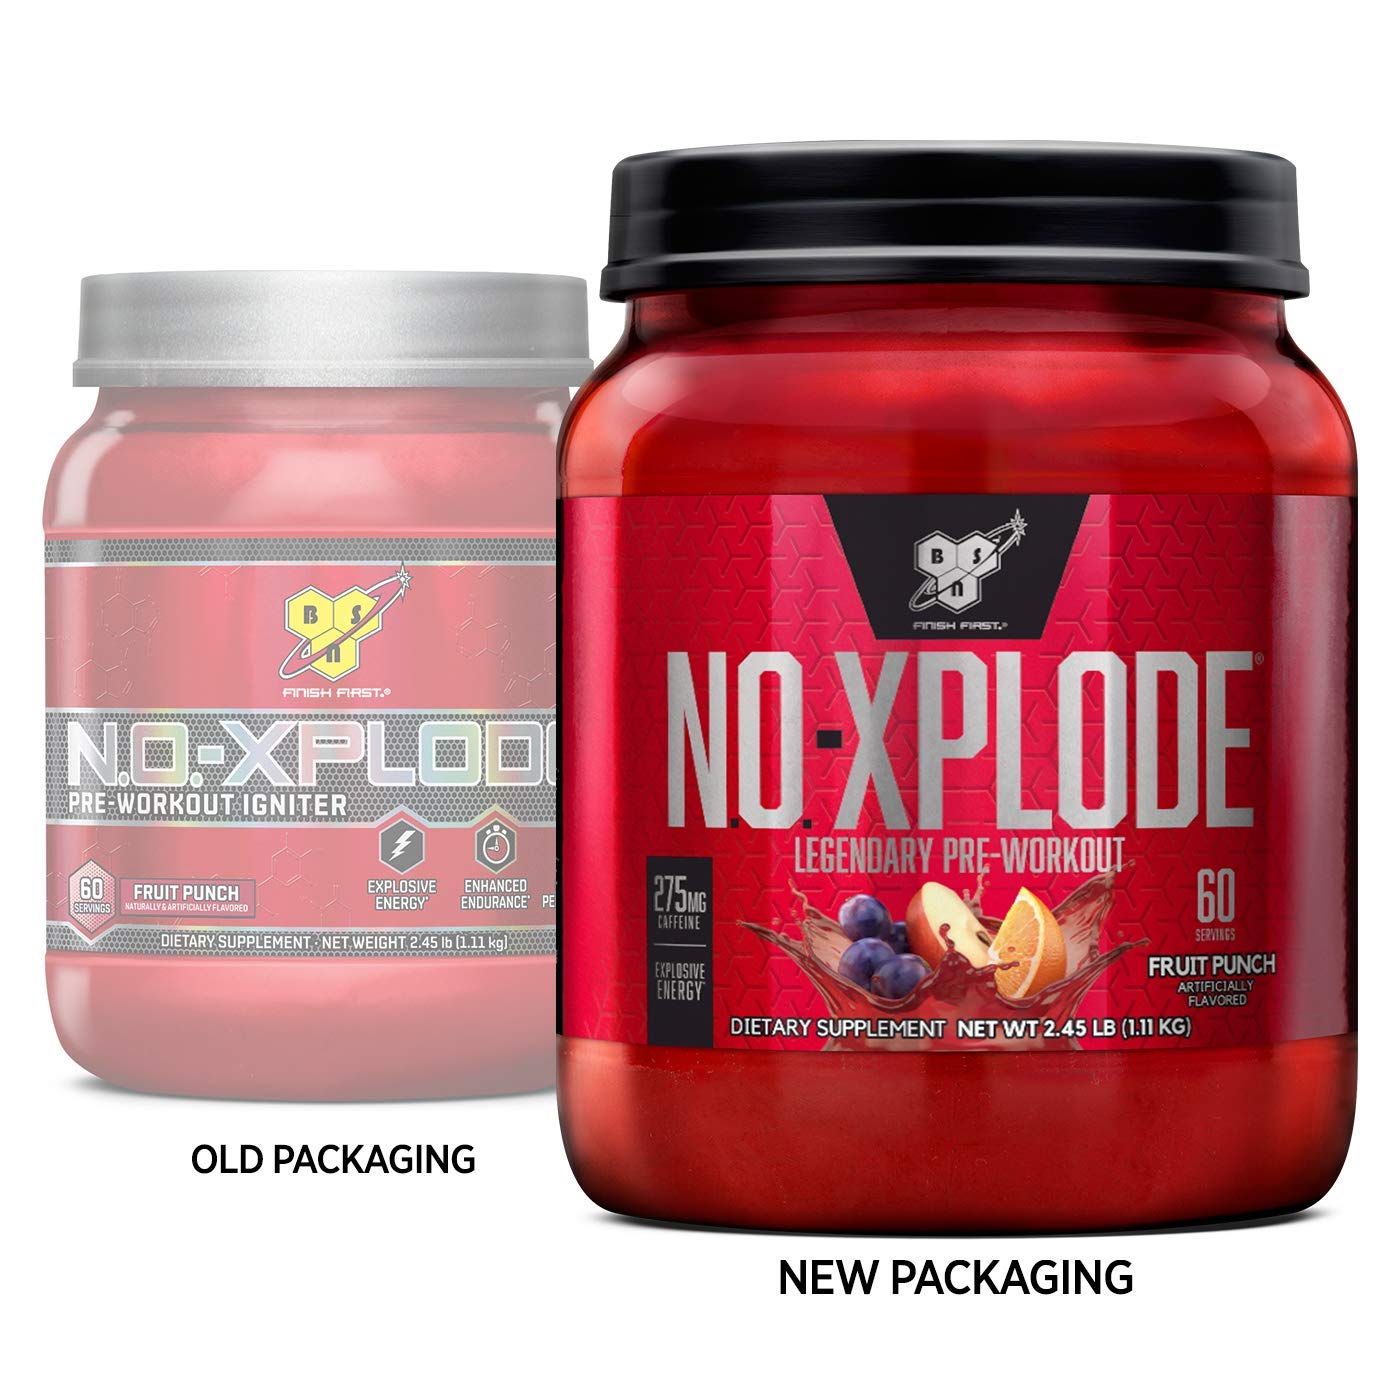 BSN N.O.-XPLODE Pre Workout Supplement with Creatine, Beta-Alanine, and Energy, Flavor: Fruit Punch, 60 Servings (Package may vary)